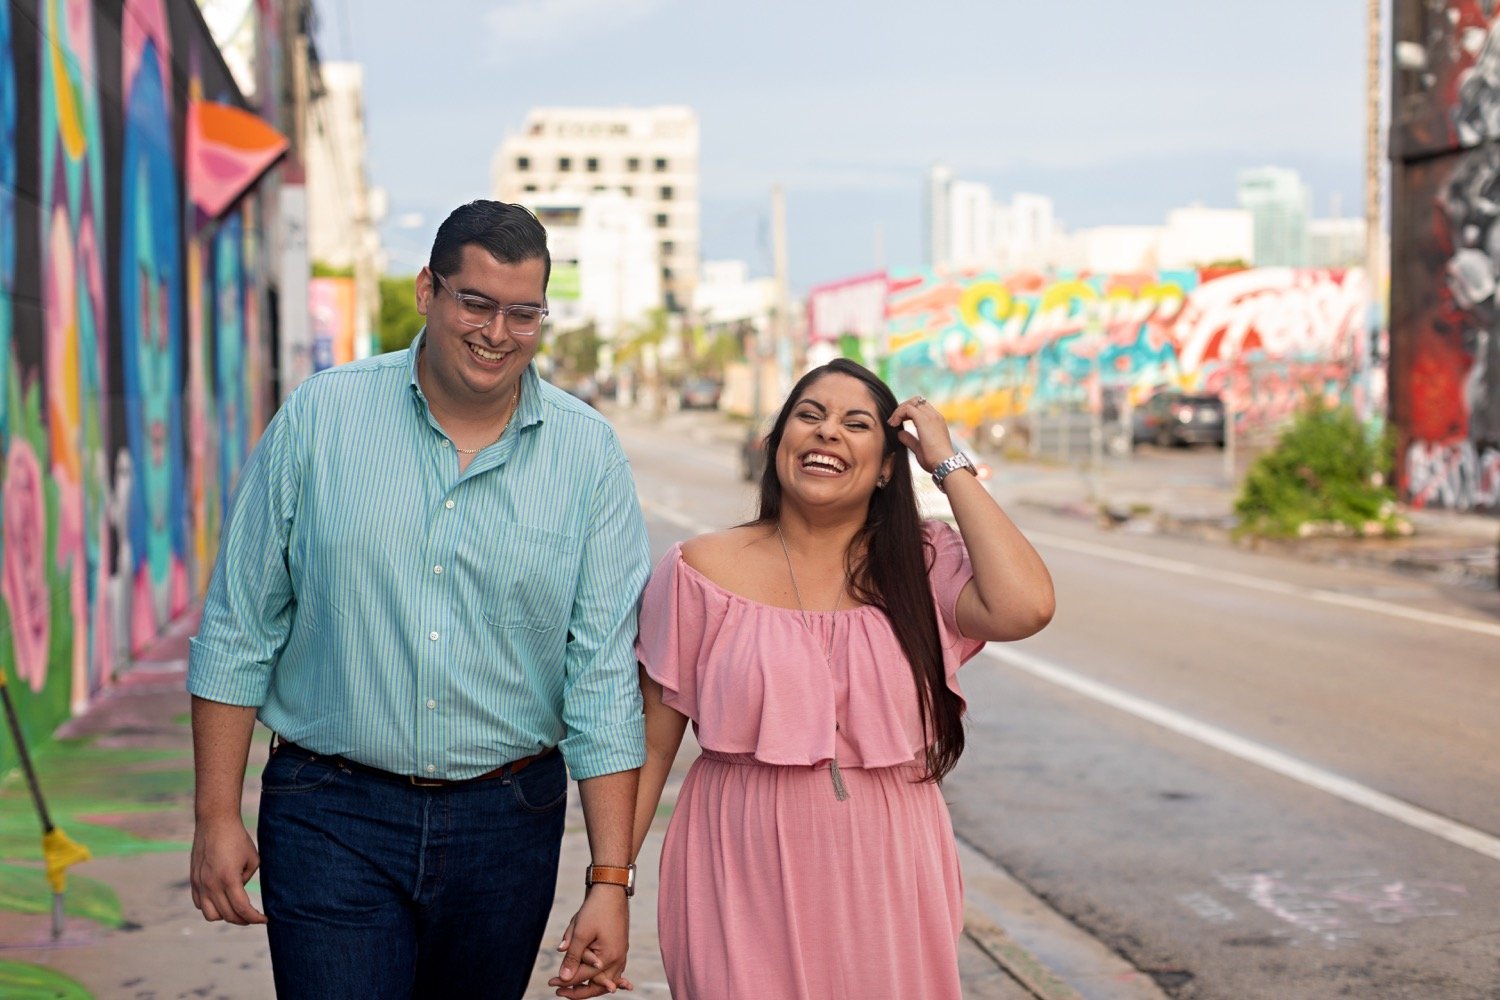 06_Wynwood-Walls-Engagement-Session-Miami-Engagement-Photographer_6476 1_posing_during_couple_in_walls_engagement_wynwood_hispanic_a_session_Mural_thier_of_front_Miami_photographer.jpg